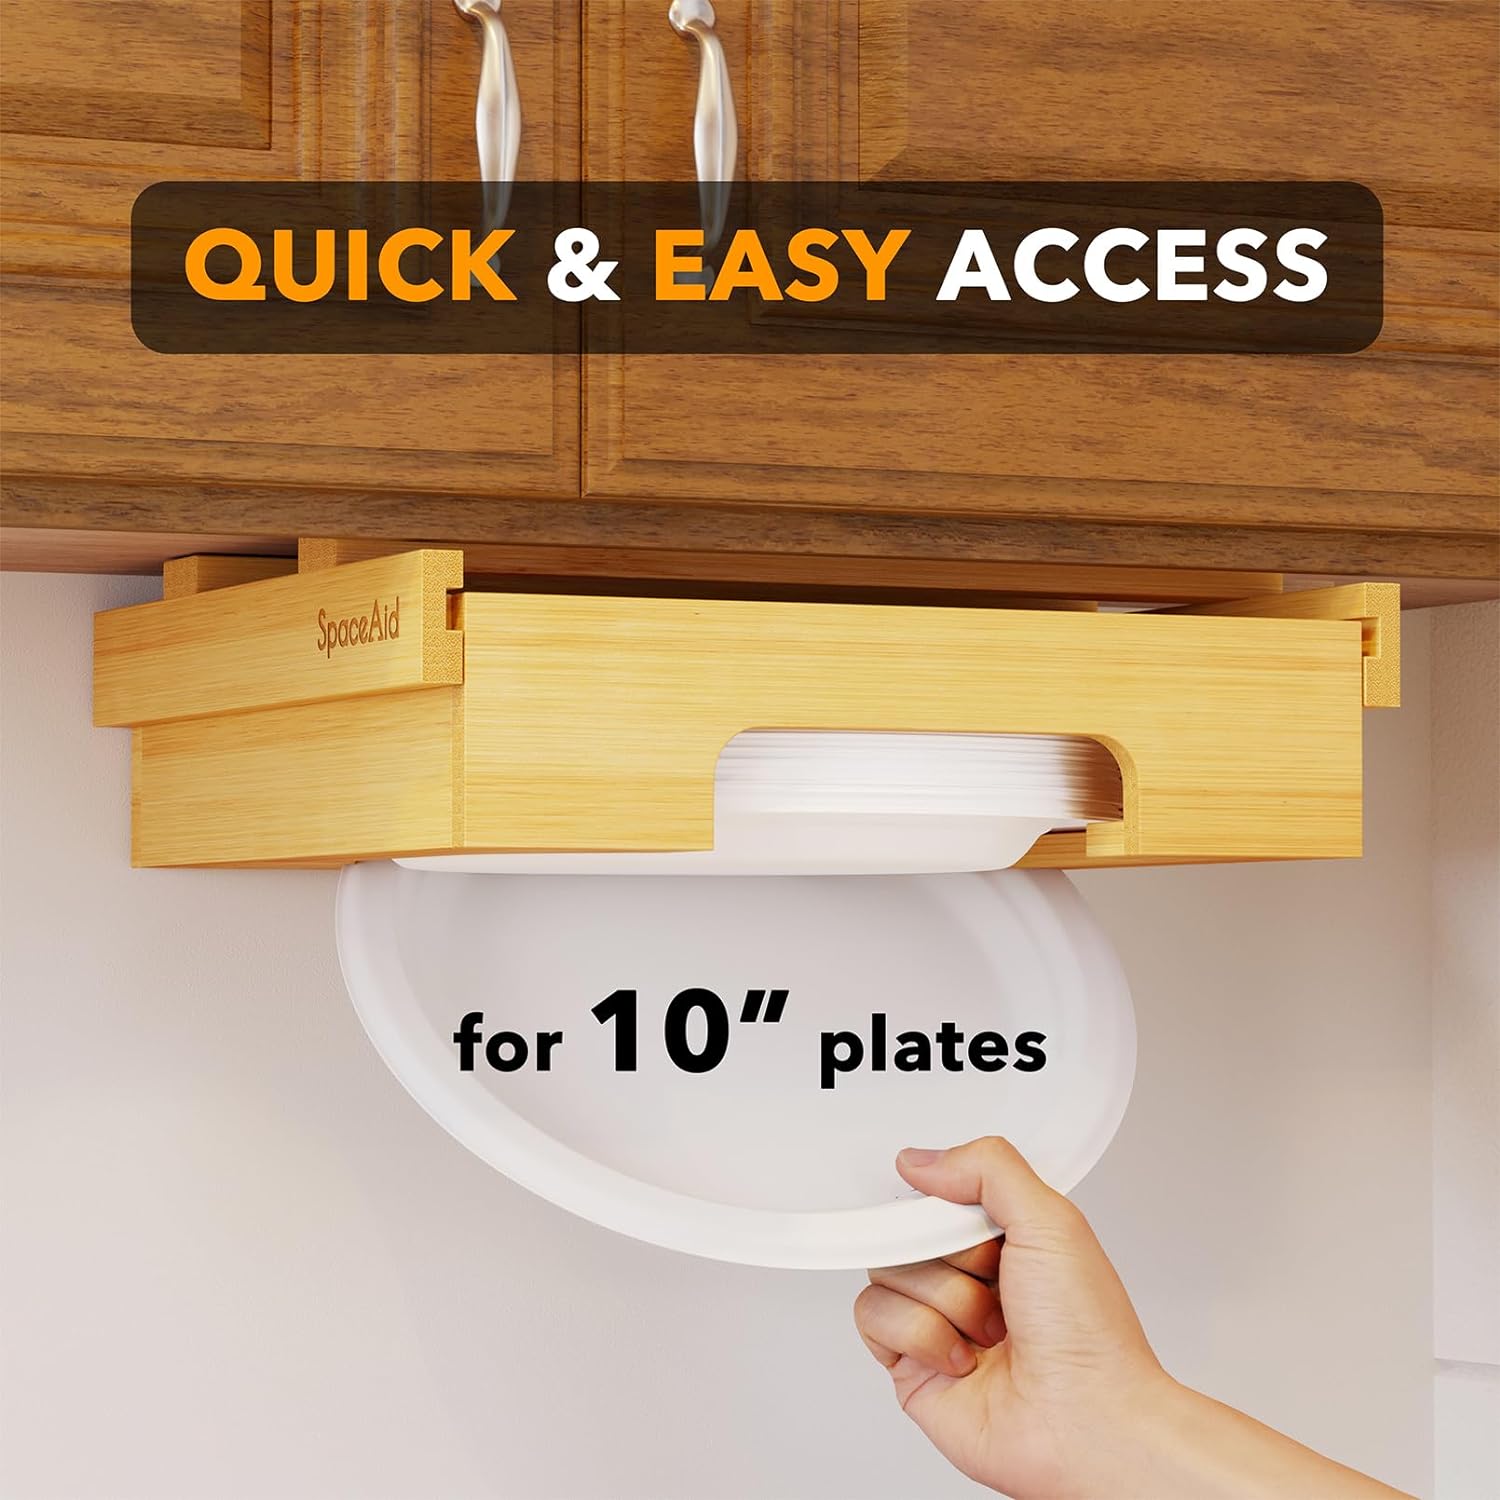 SpaceAid 10-inch Bamboo Vertical Paper Plate Organizer for Kitchen Cabinet Paper-plate-organizer-3